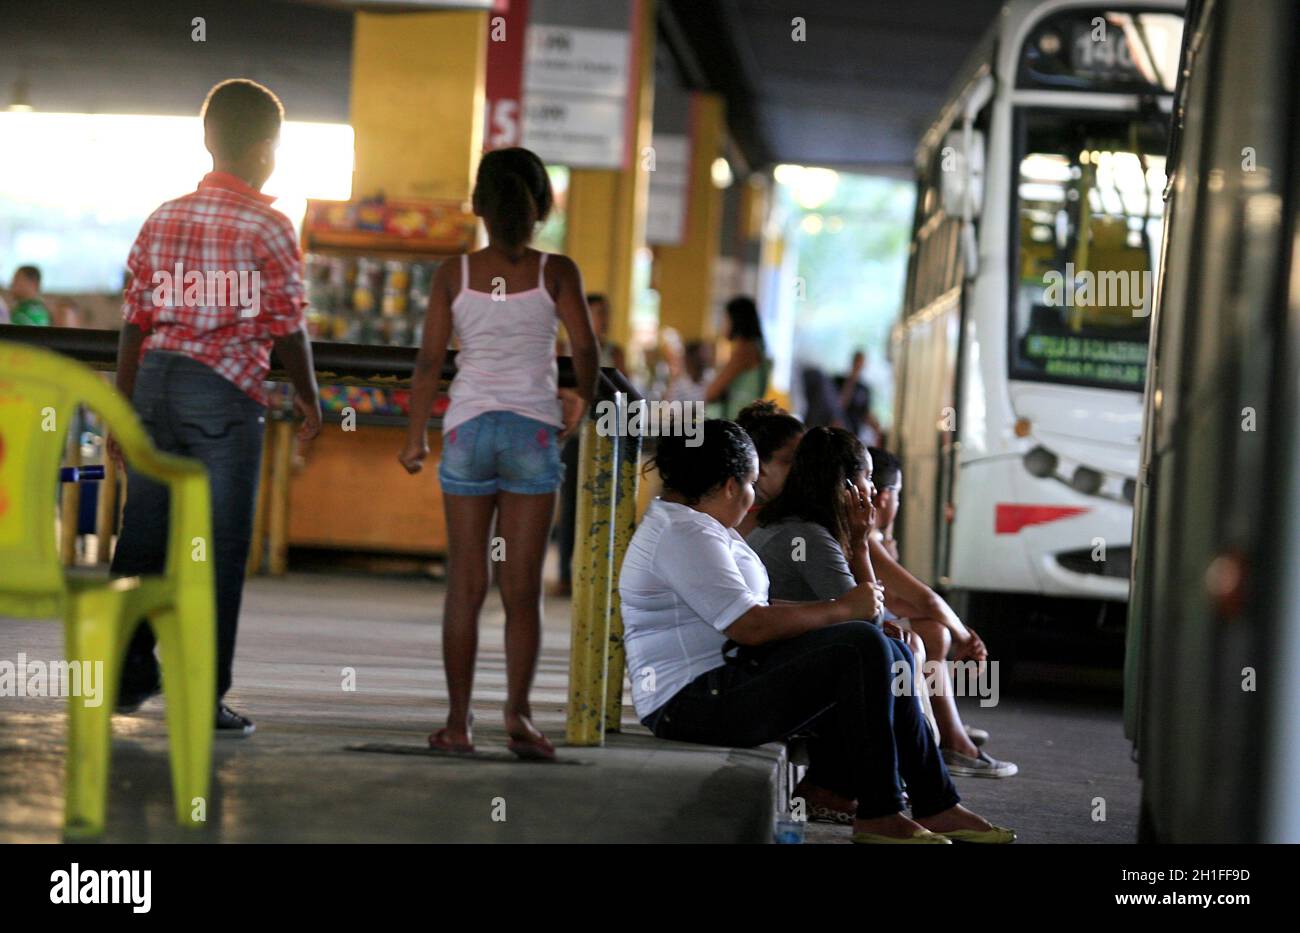 salvador, bahia / brazil - may 26, 2014: Queue of buses stopped near the entrance of Piraja Station in Salvador, is seen during public transport drive Stock Photo